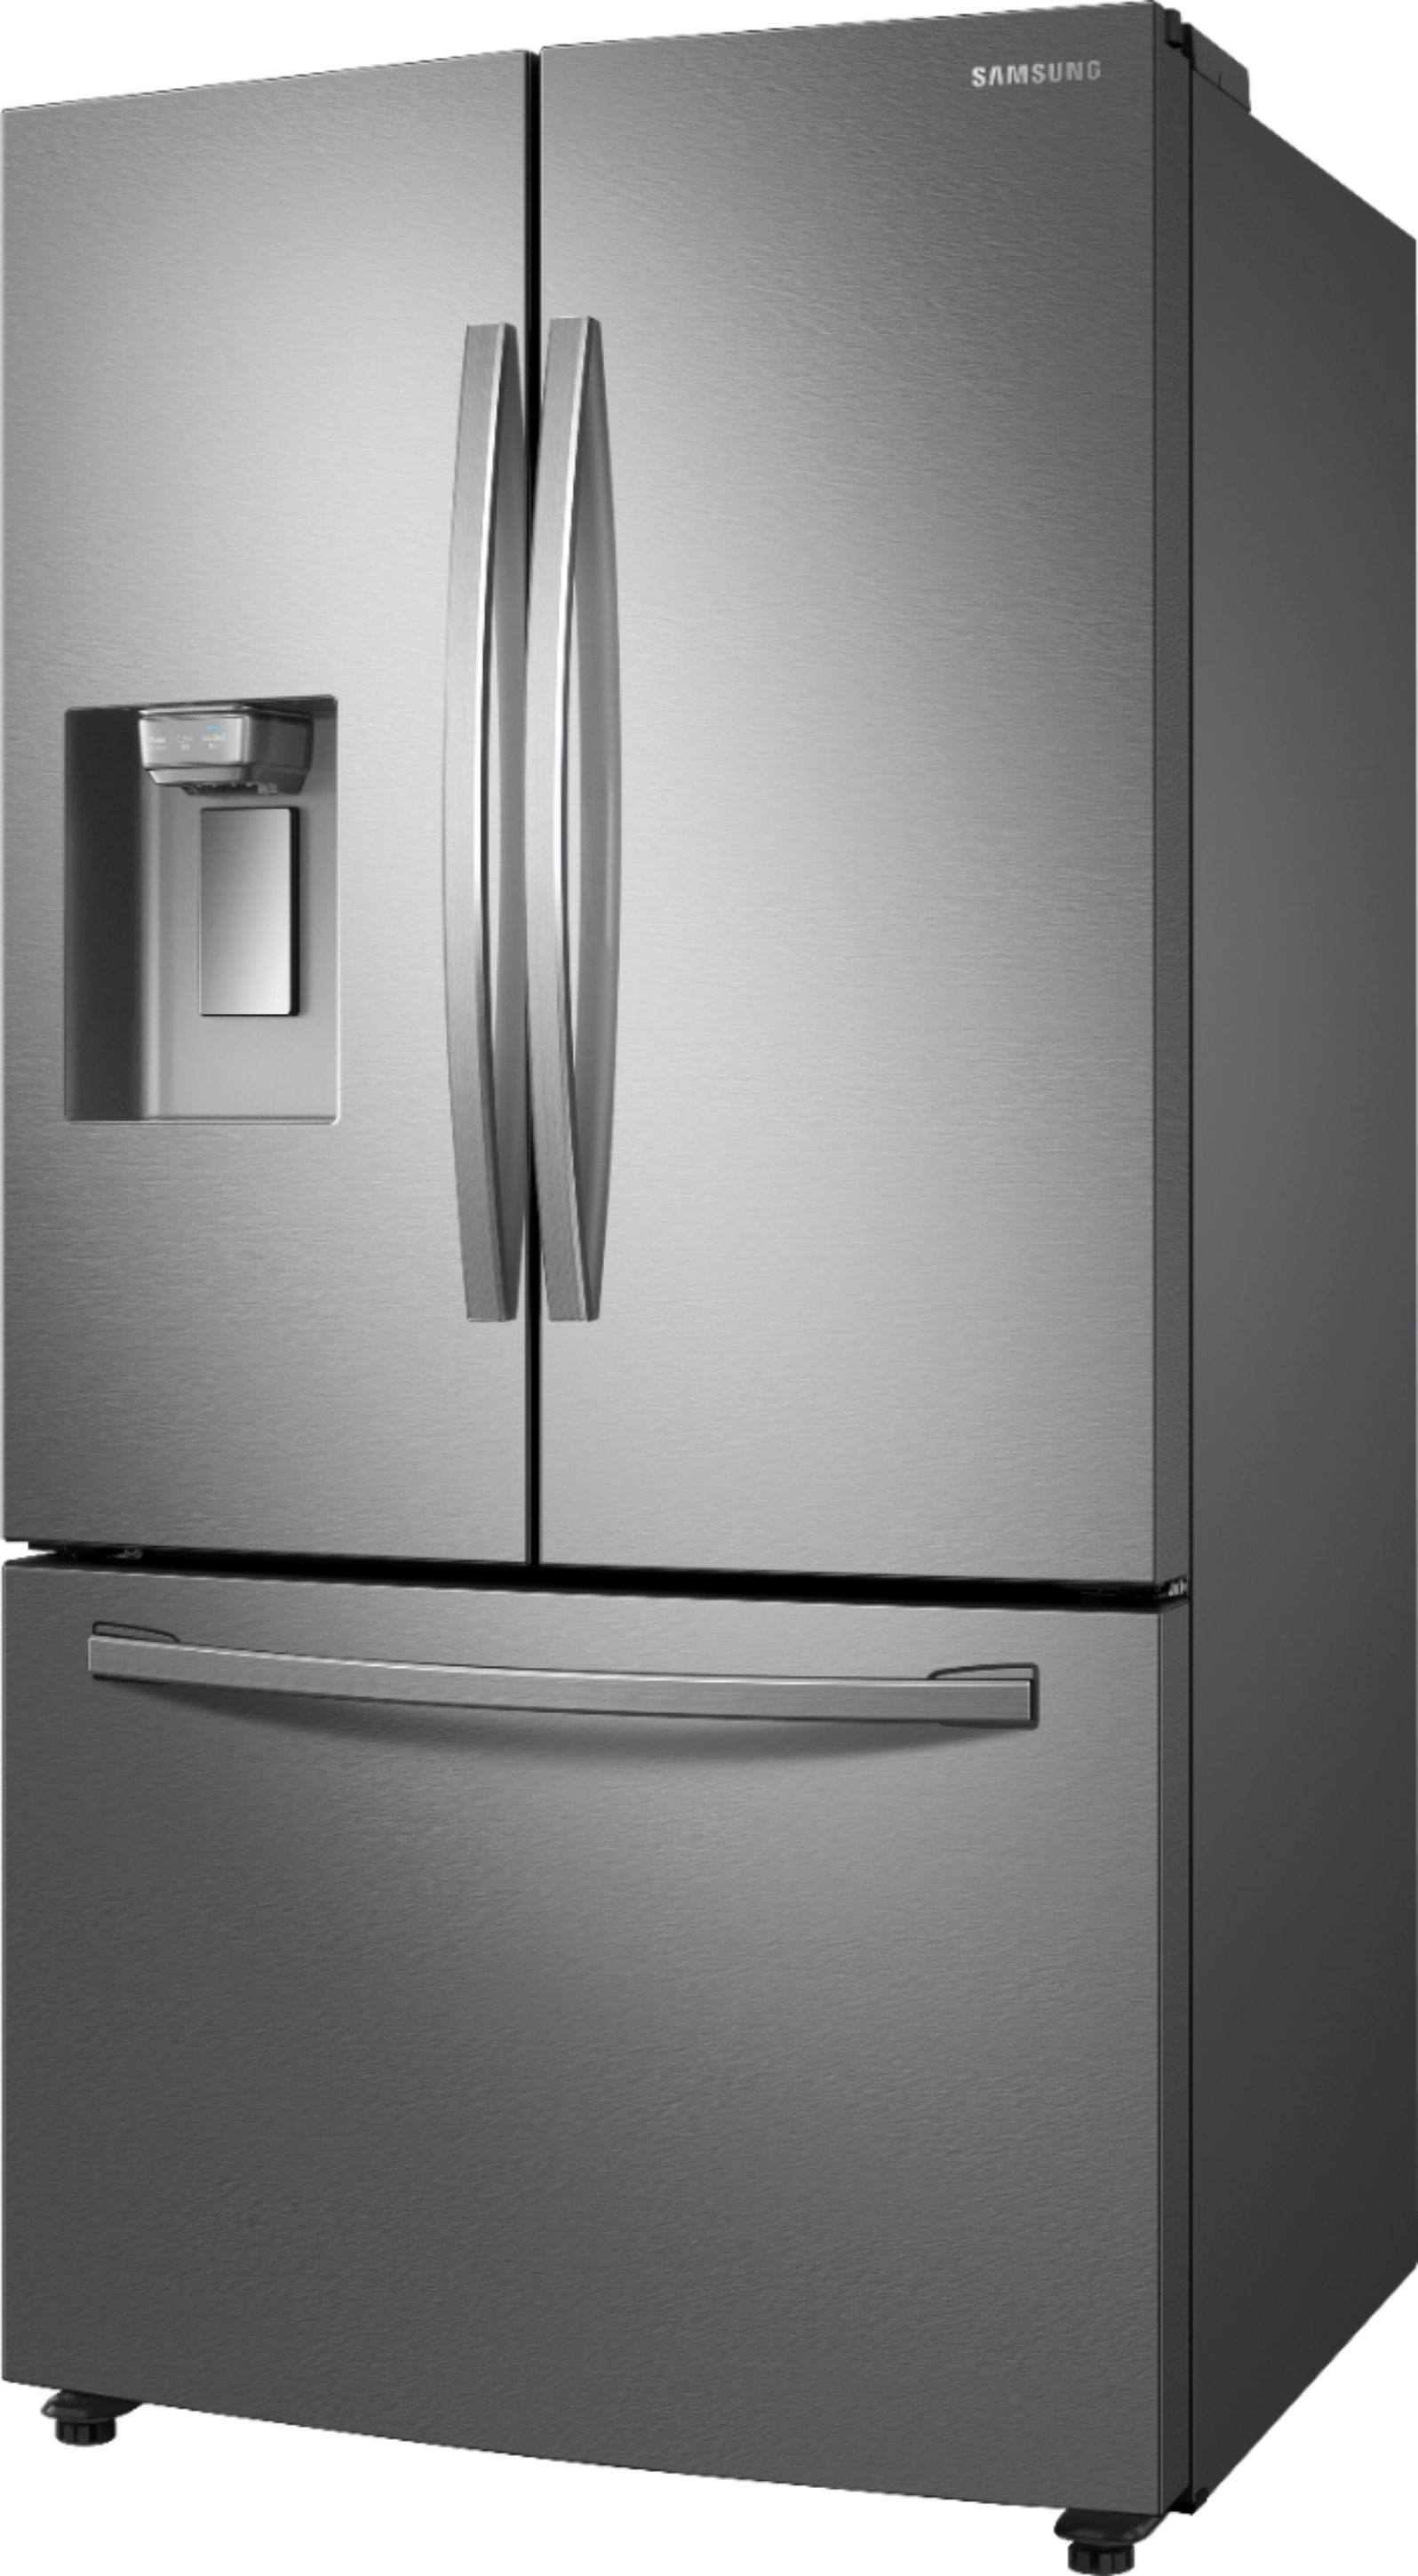 Left View: Samsung - 28 Cu. Ft. French Door Refrigerator with CoolSelect Pantry - Stainless steel